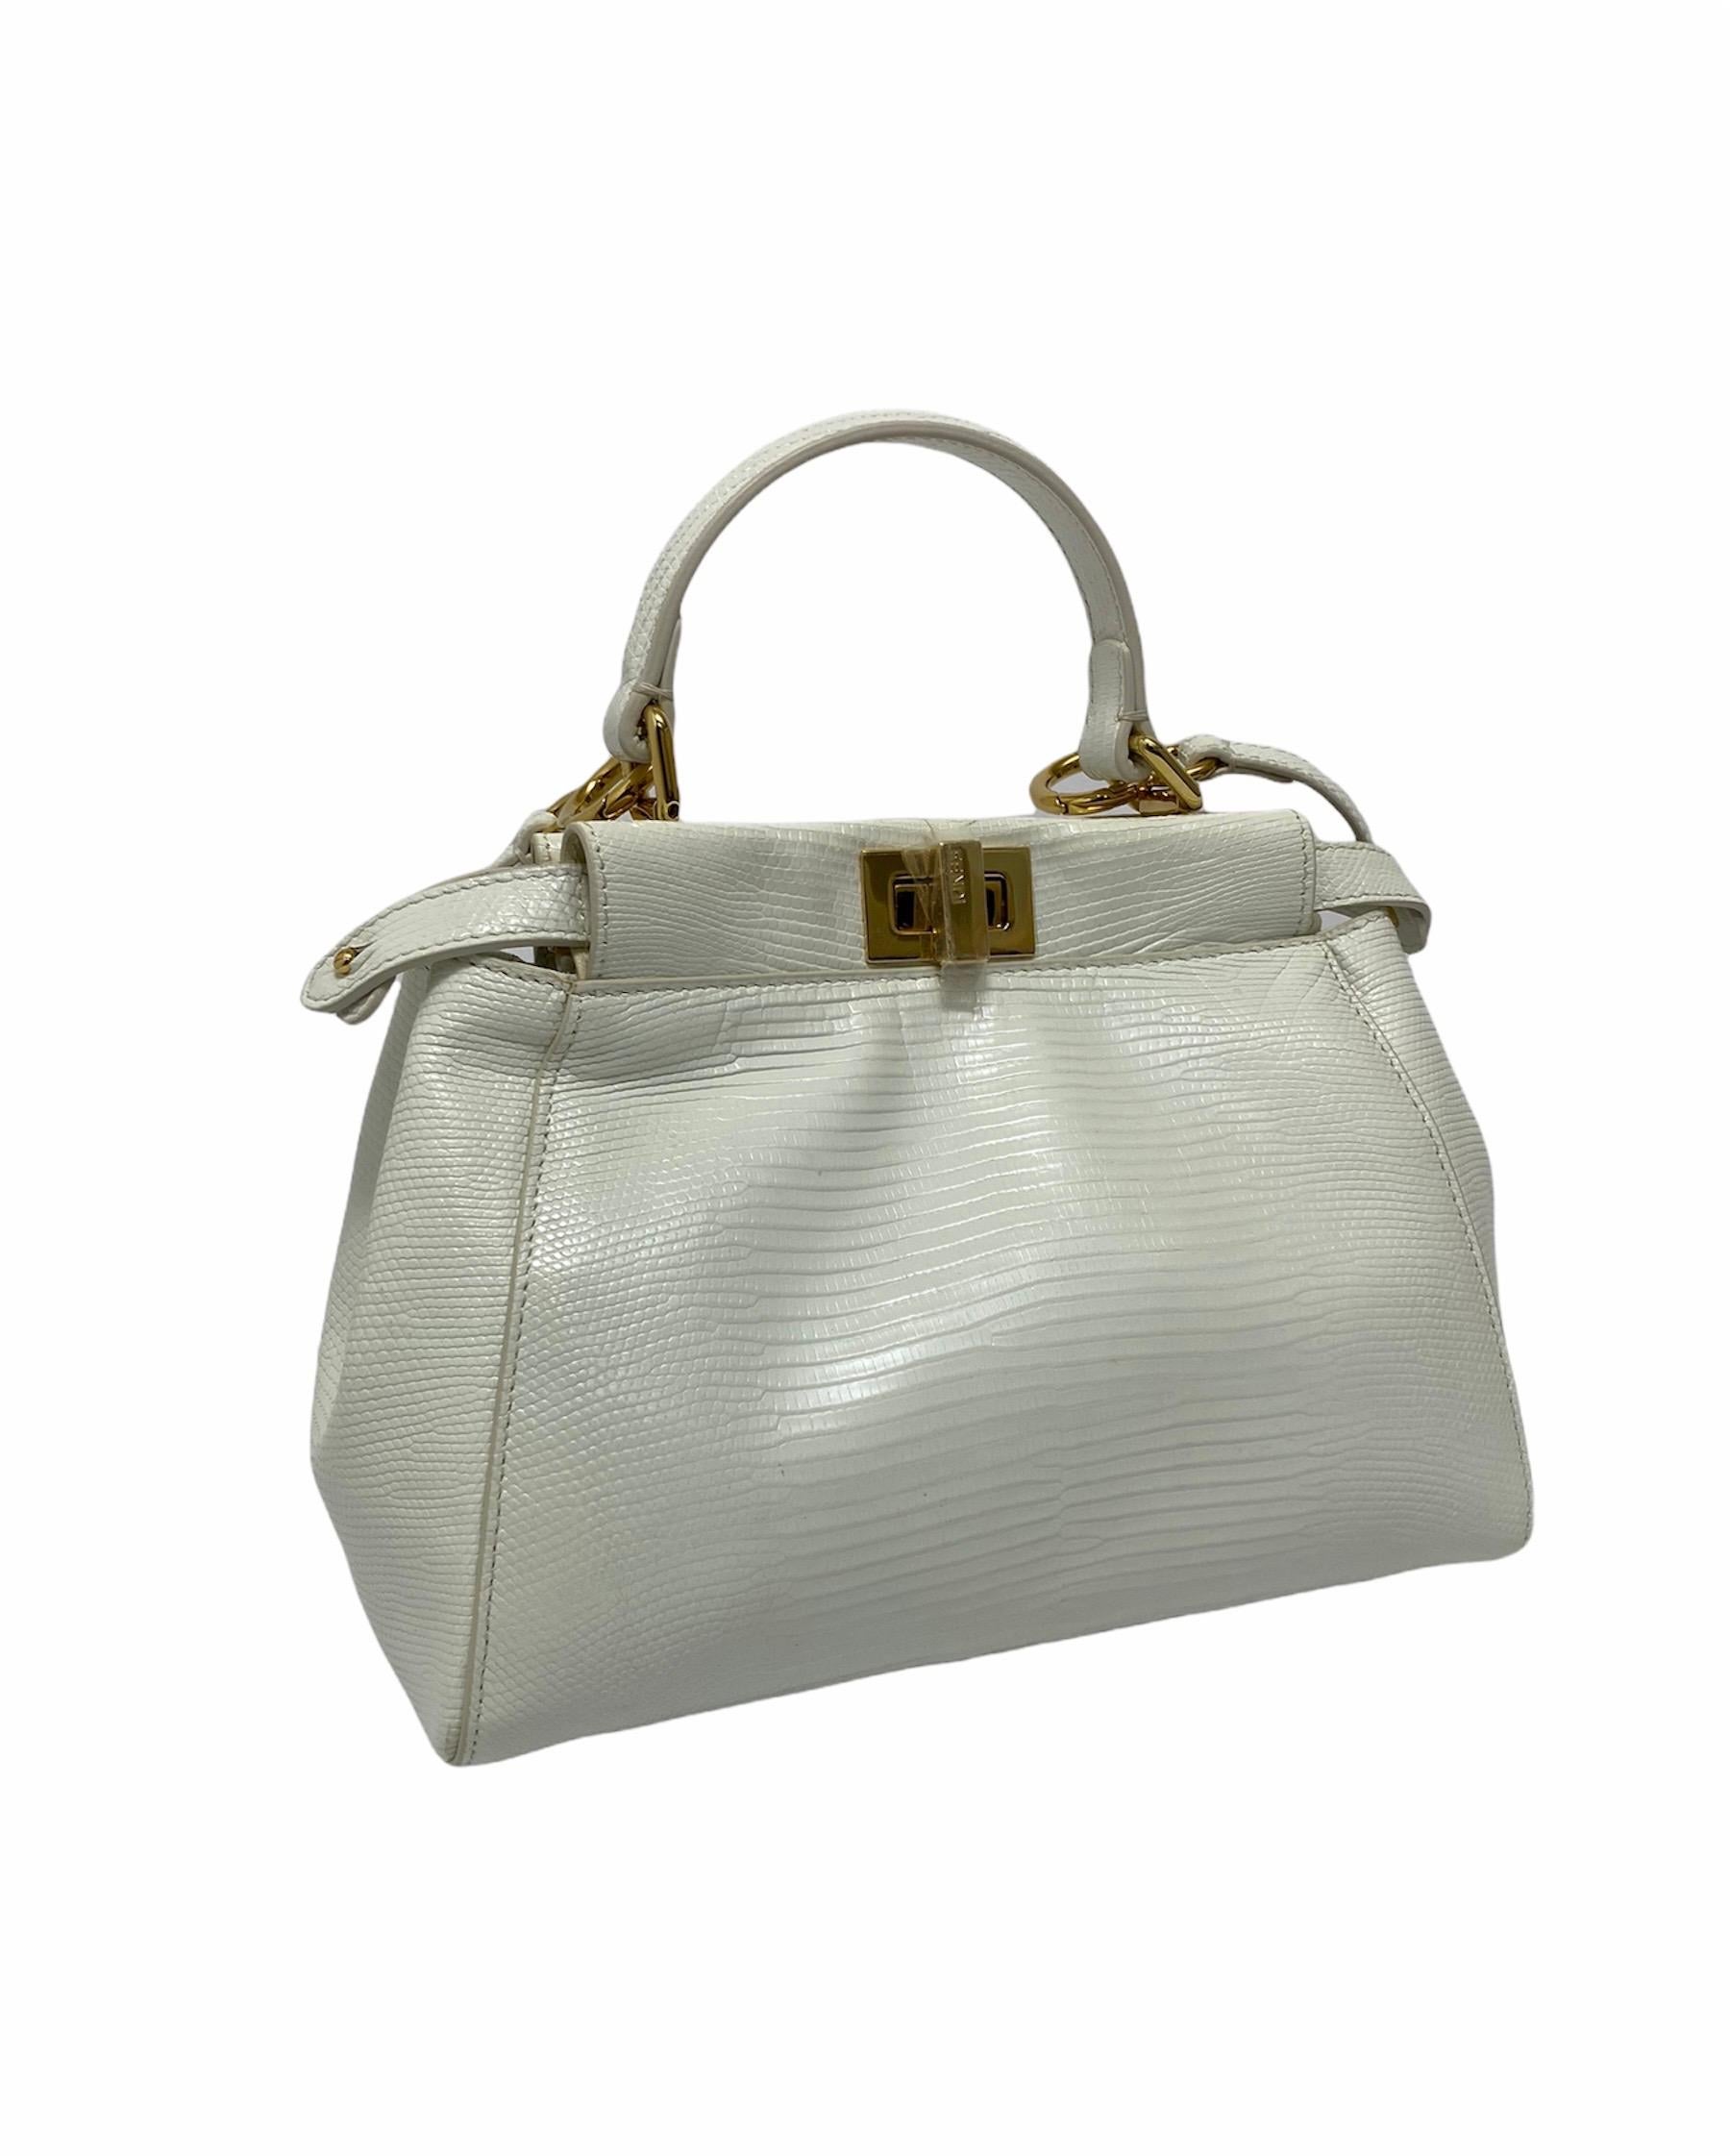 Fendi Peekaboo model bag made of leather of white reptile with golden hardware. Closure with hook, internally quite large and equipped with pockets. Equipped with leather handle and removable shoulder strap. The bag is in like new condition.